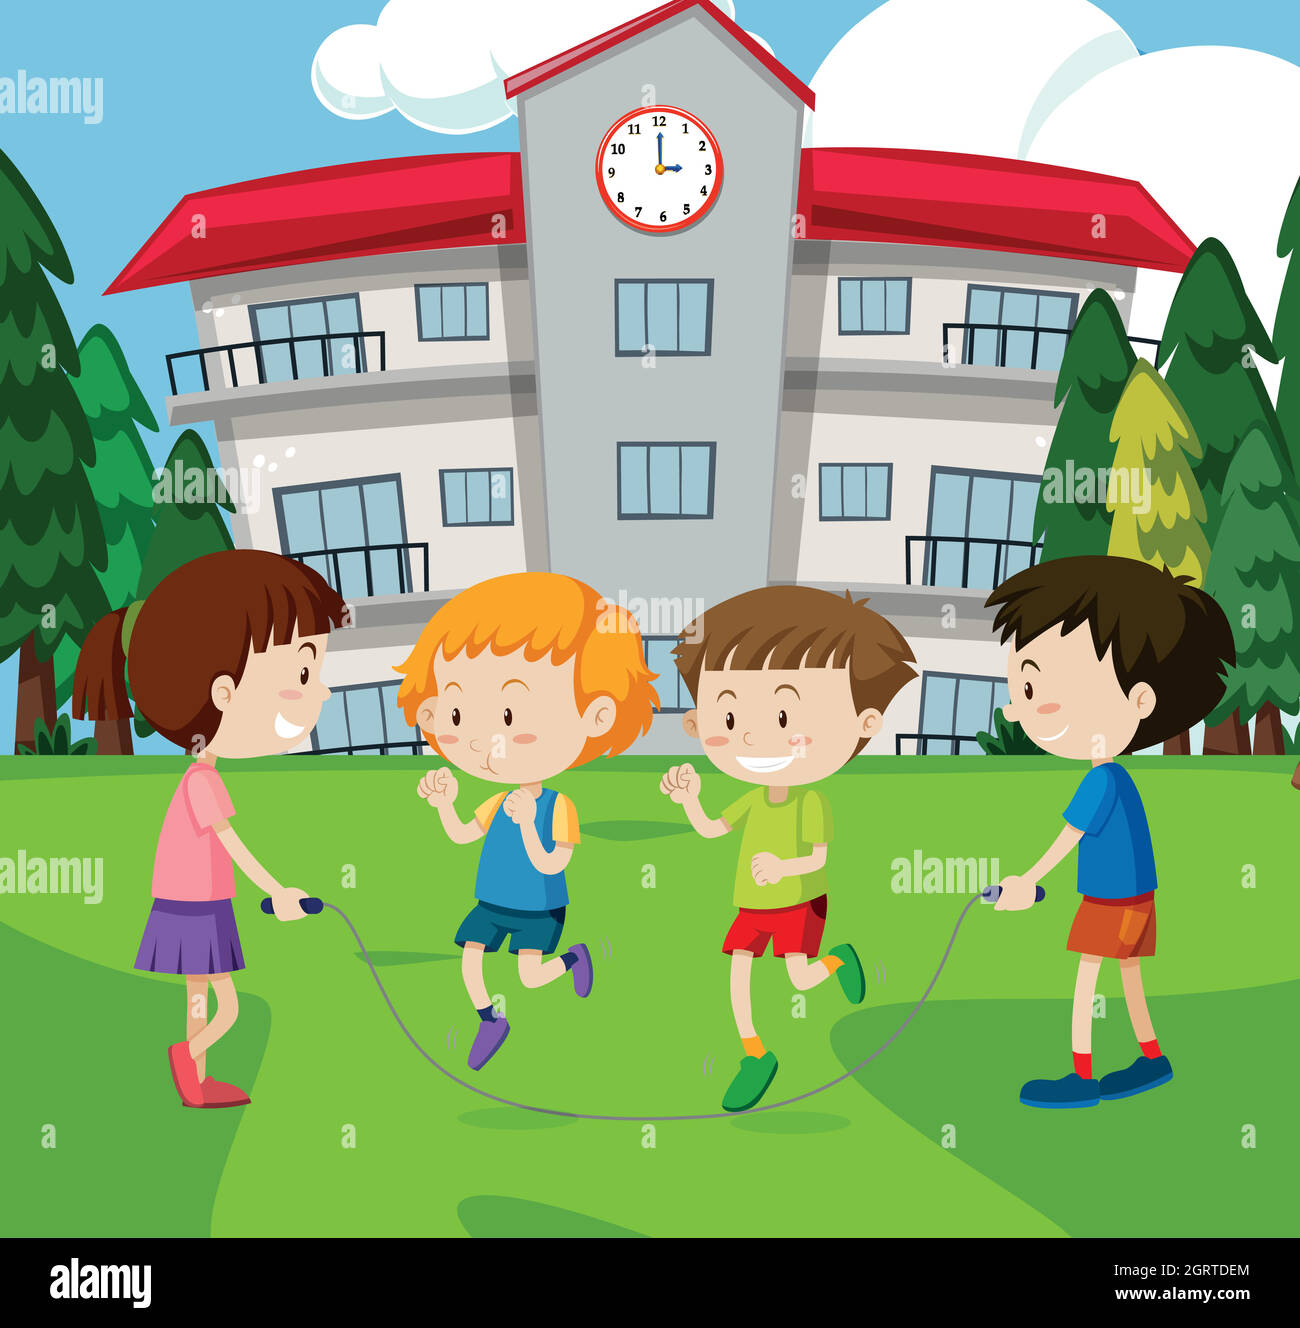 A Kid Rope Jumping at School Stock Vector